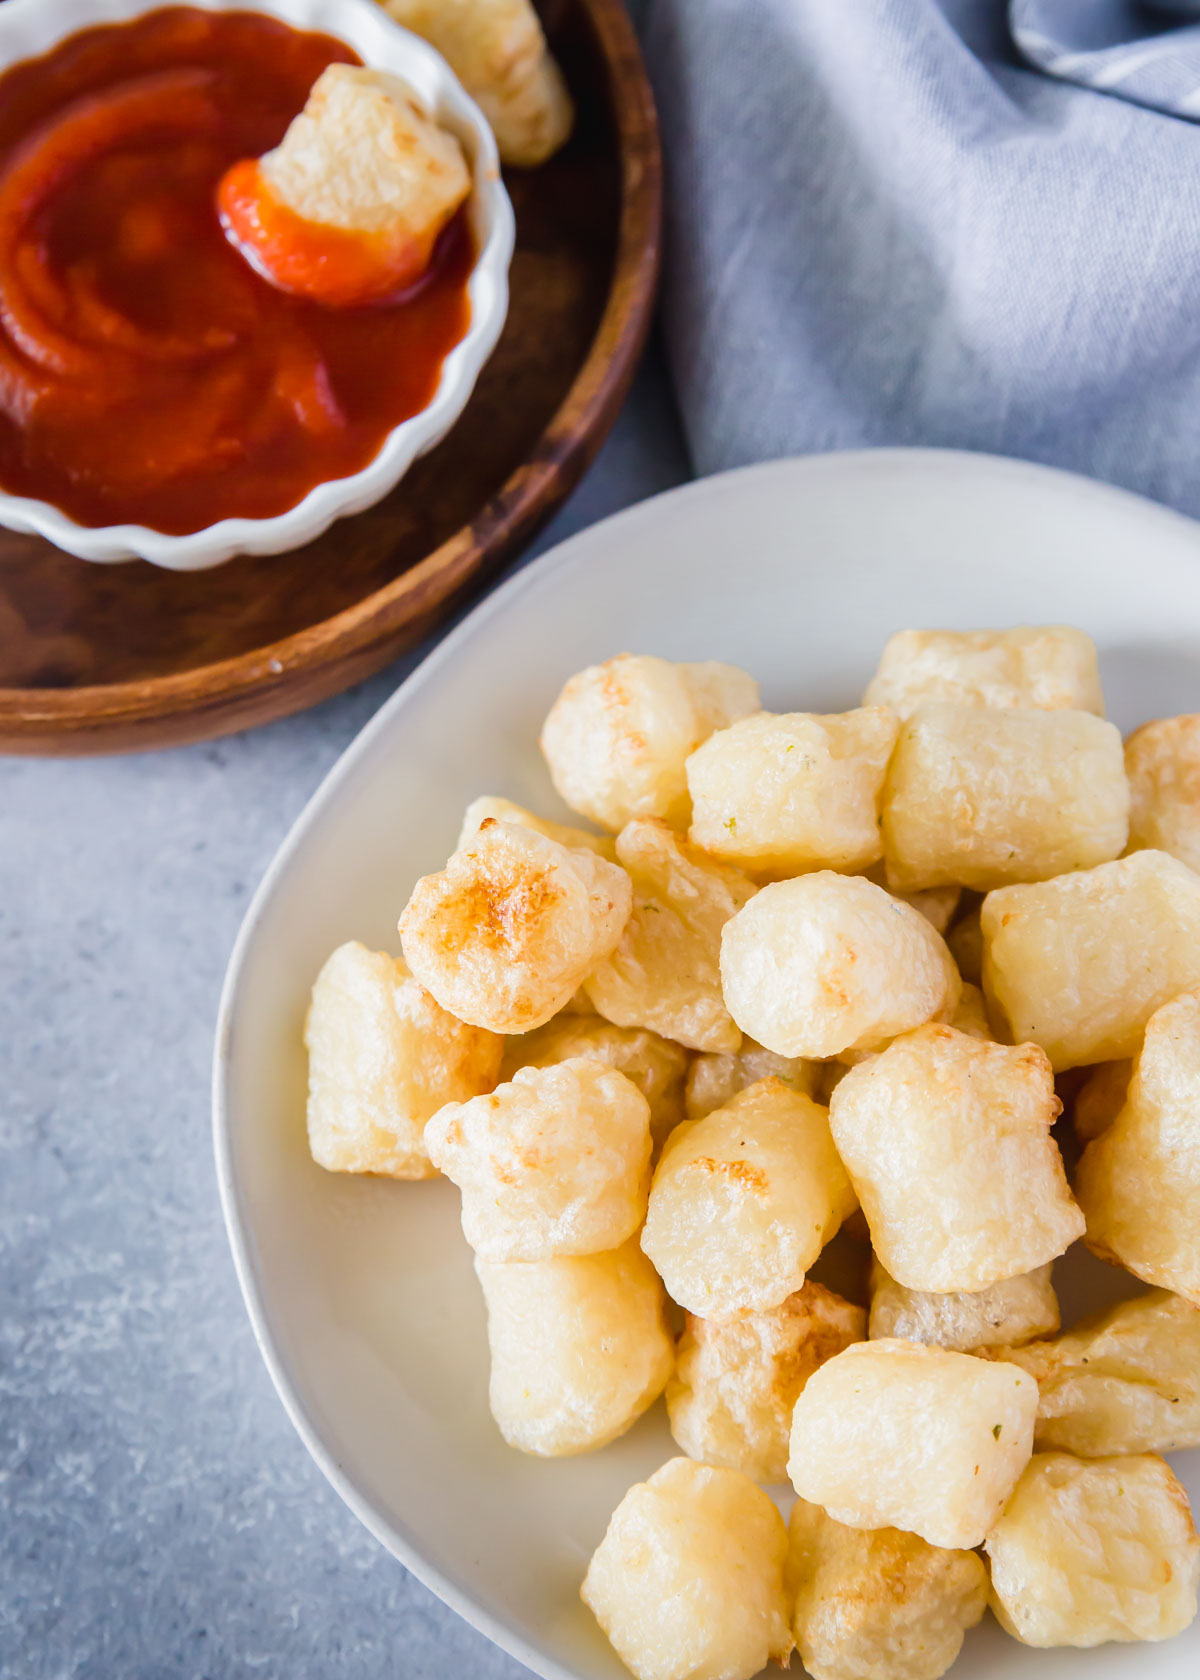 With a crispy outside and soft inside, cooking cauliflower gnocchi in an air fryer is the best preparation method and so easy!